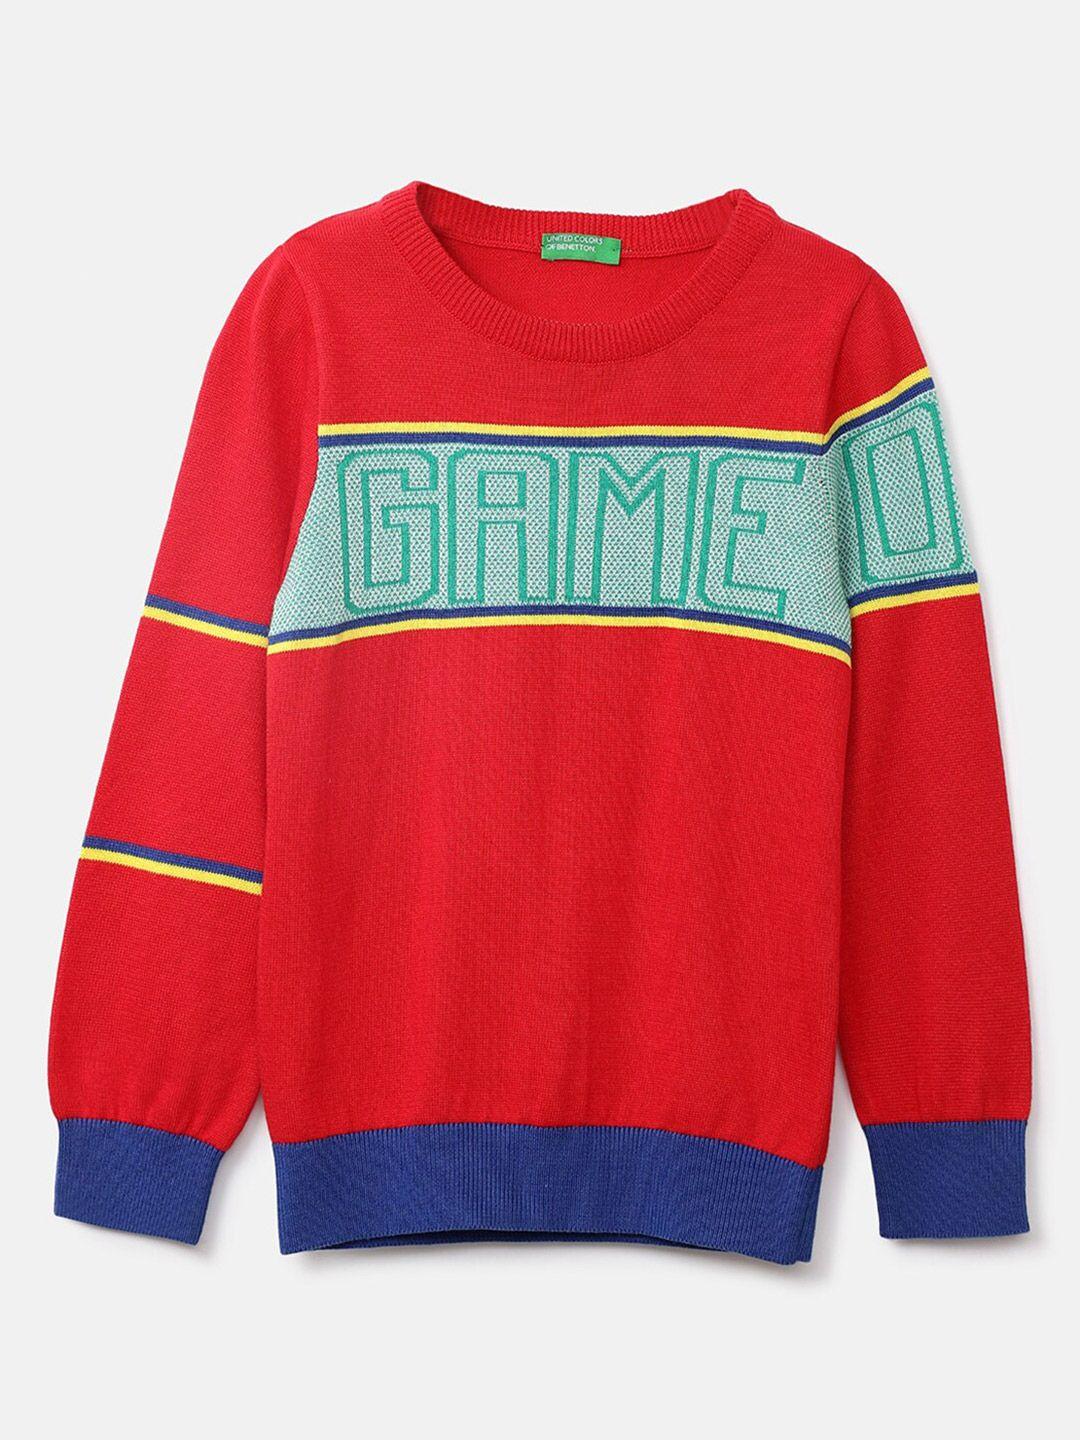 united-colors-of-benetton-boys-red-&-blue-typography-printed-pullover